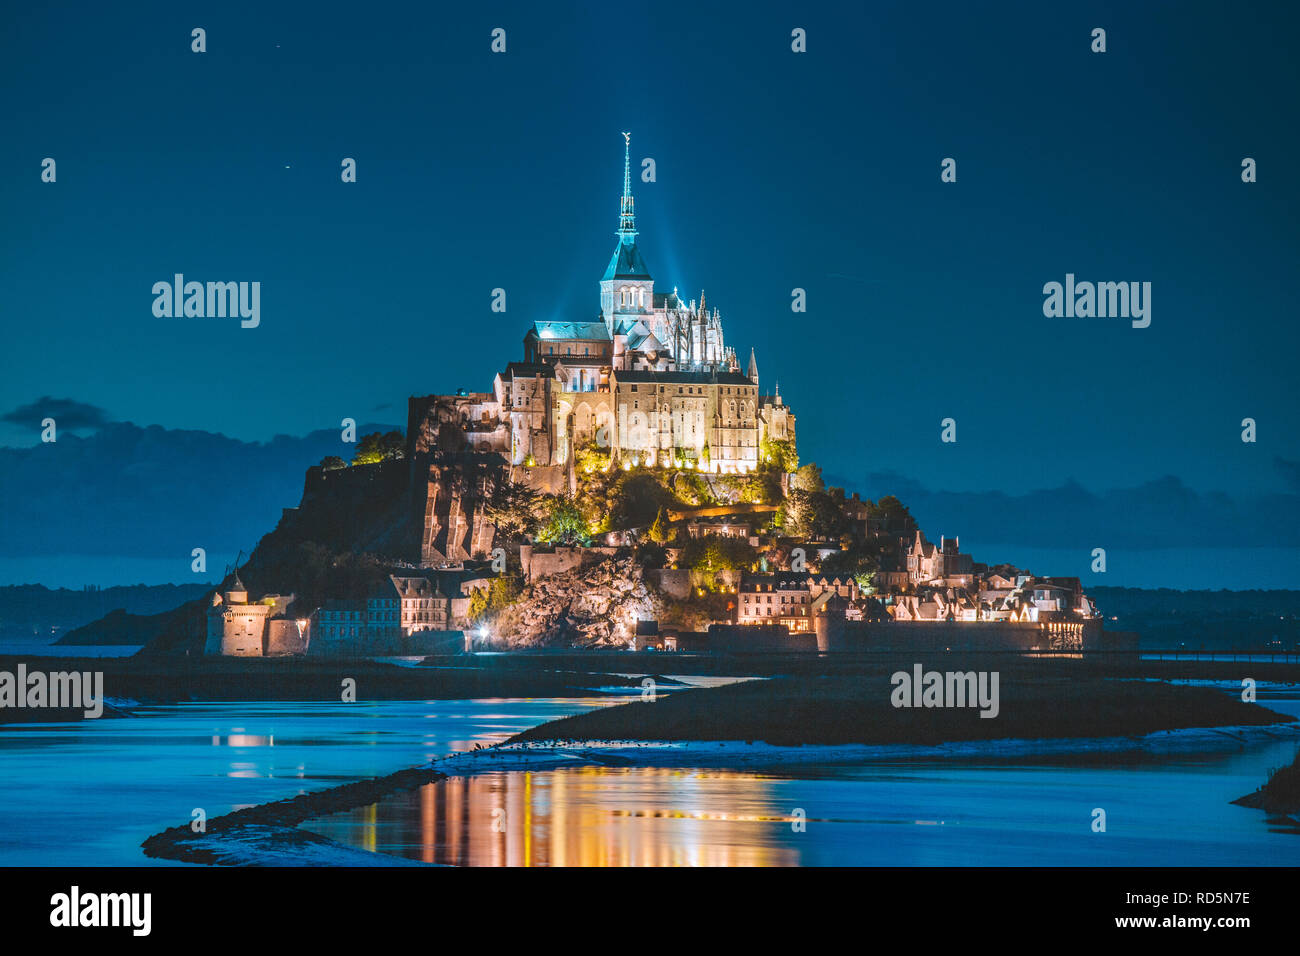 Classic view of famous Le Mont Saint-Michel tidal island in beautiful twilight during blue hour at dusk, Normandy, northern France Stock Photo